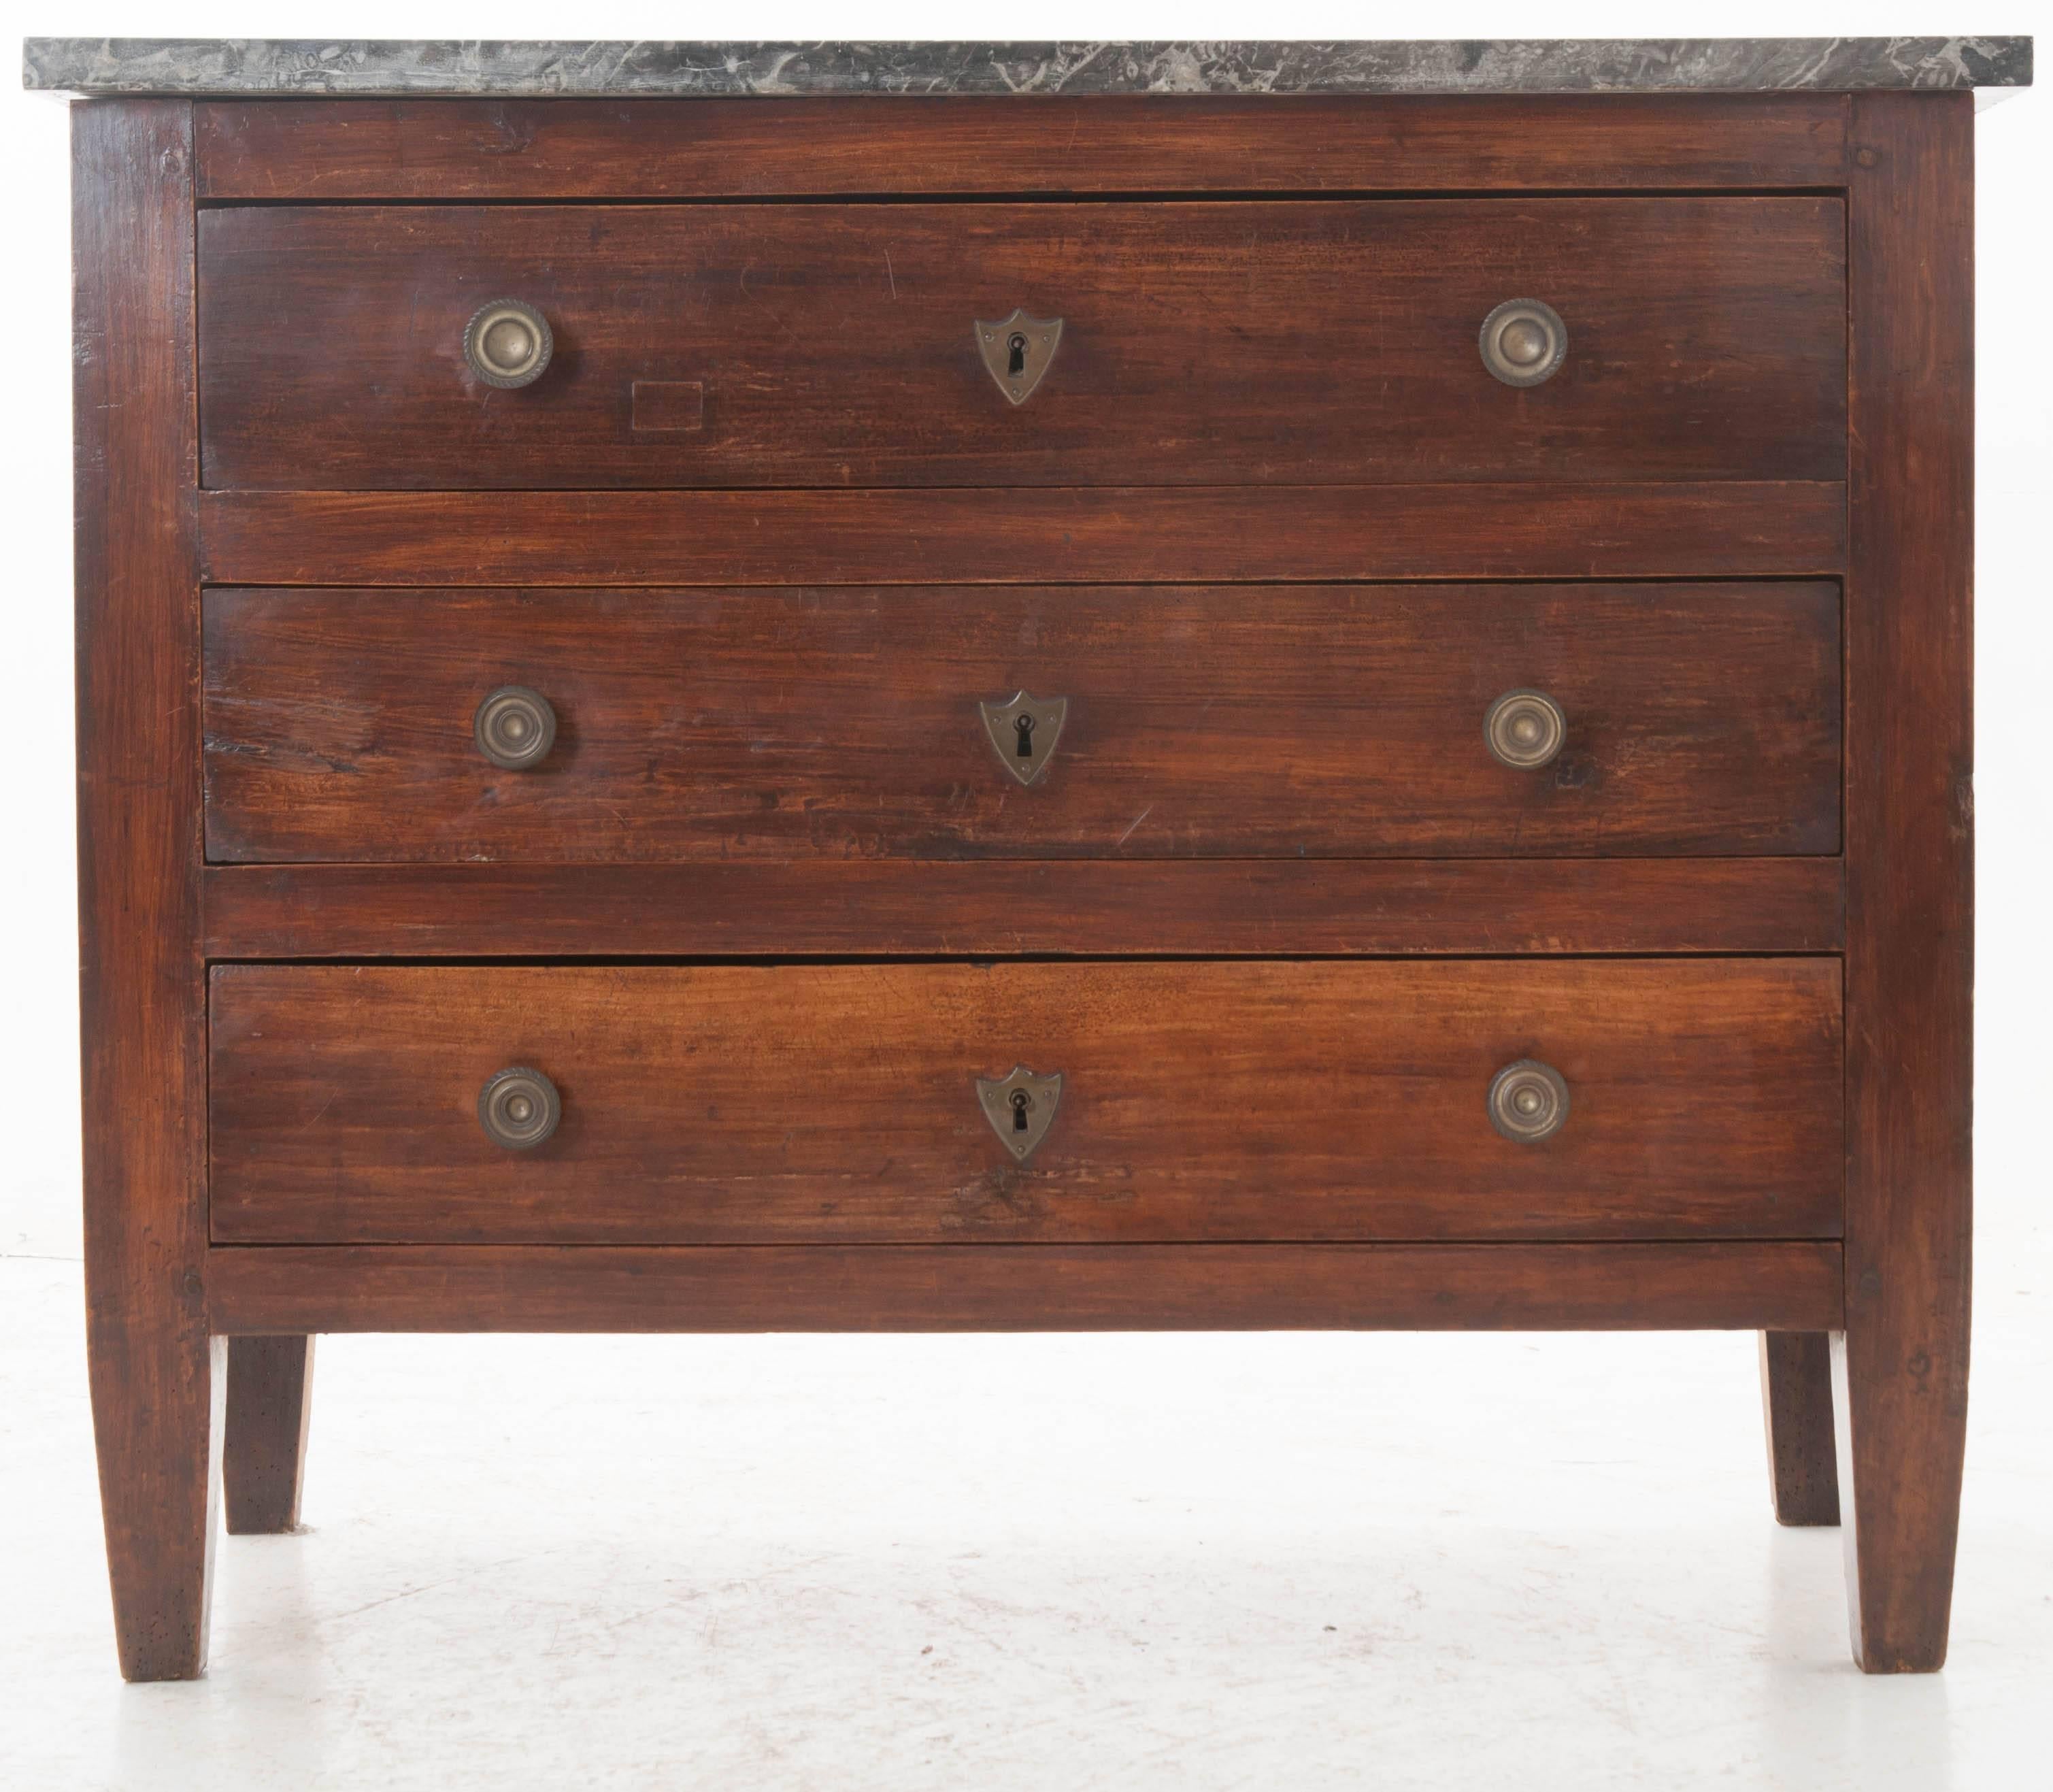 Combining elements of Directoire and Empire styles, this great little transitional three-drawer commode has a style that is all its own. The gray marble top is in good antique condition with vibrant white veins running throughout. Empirically